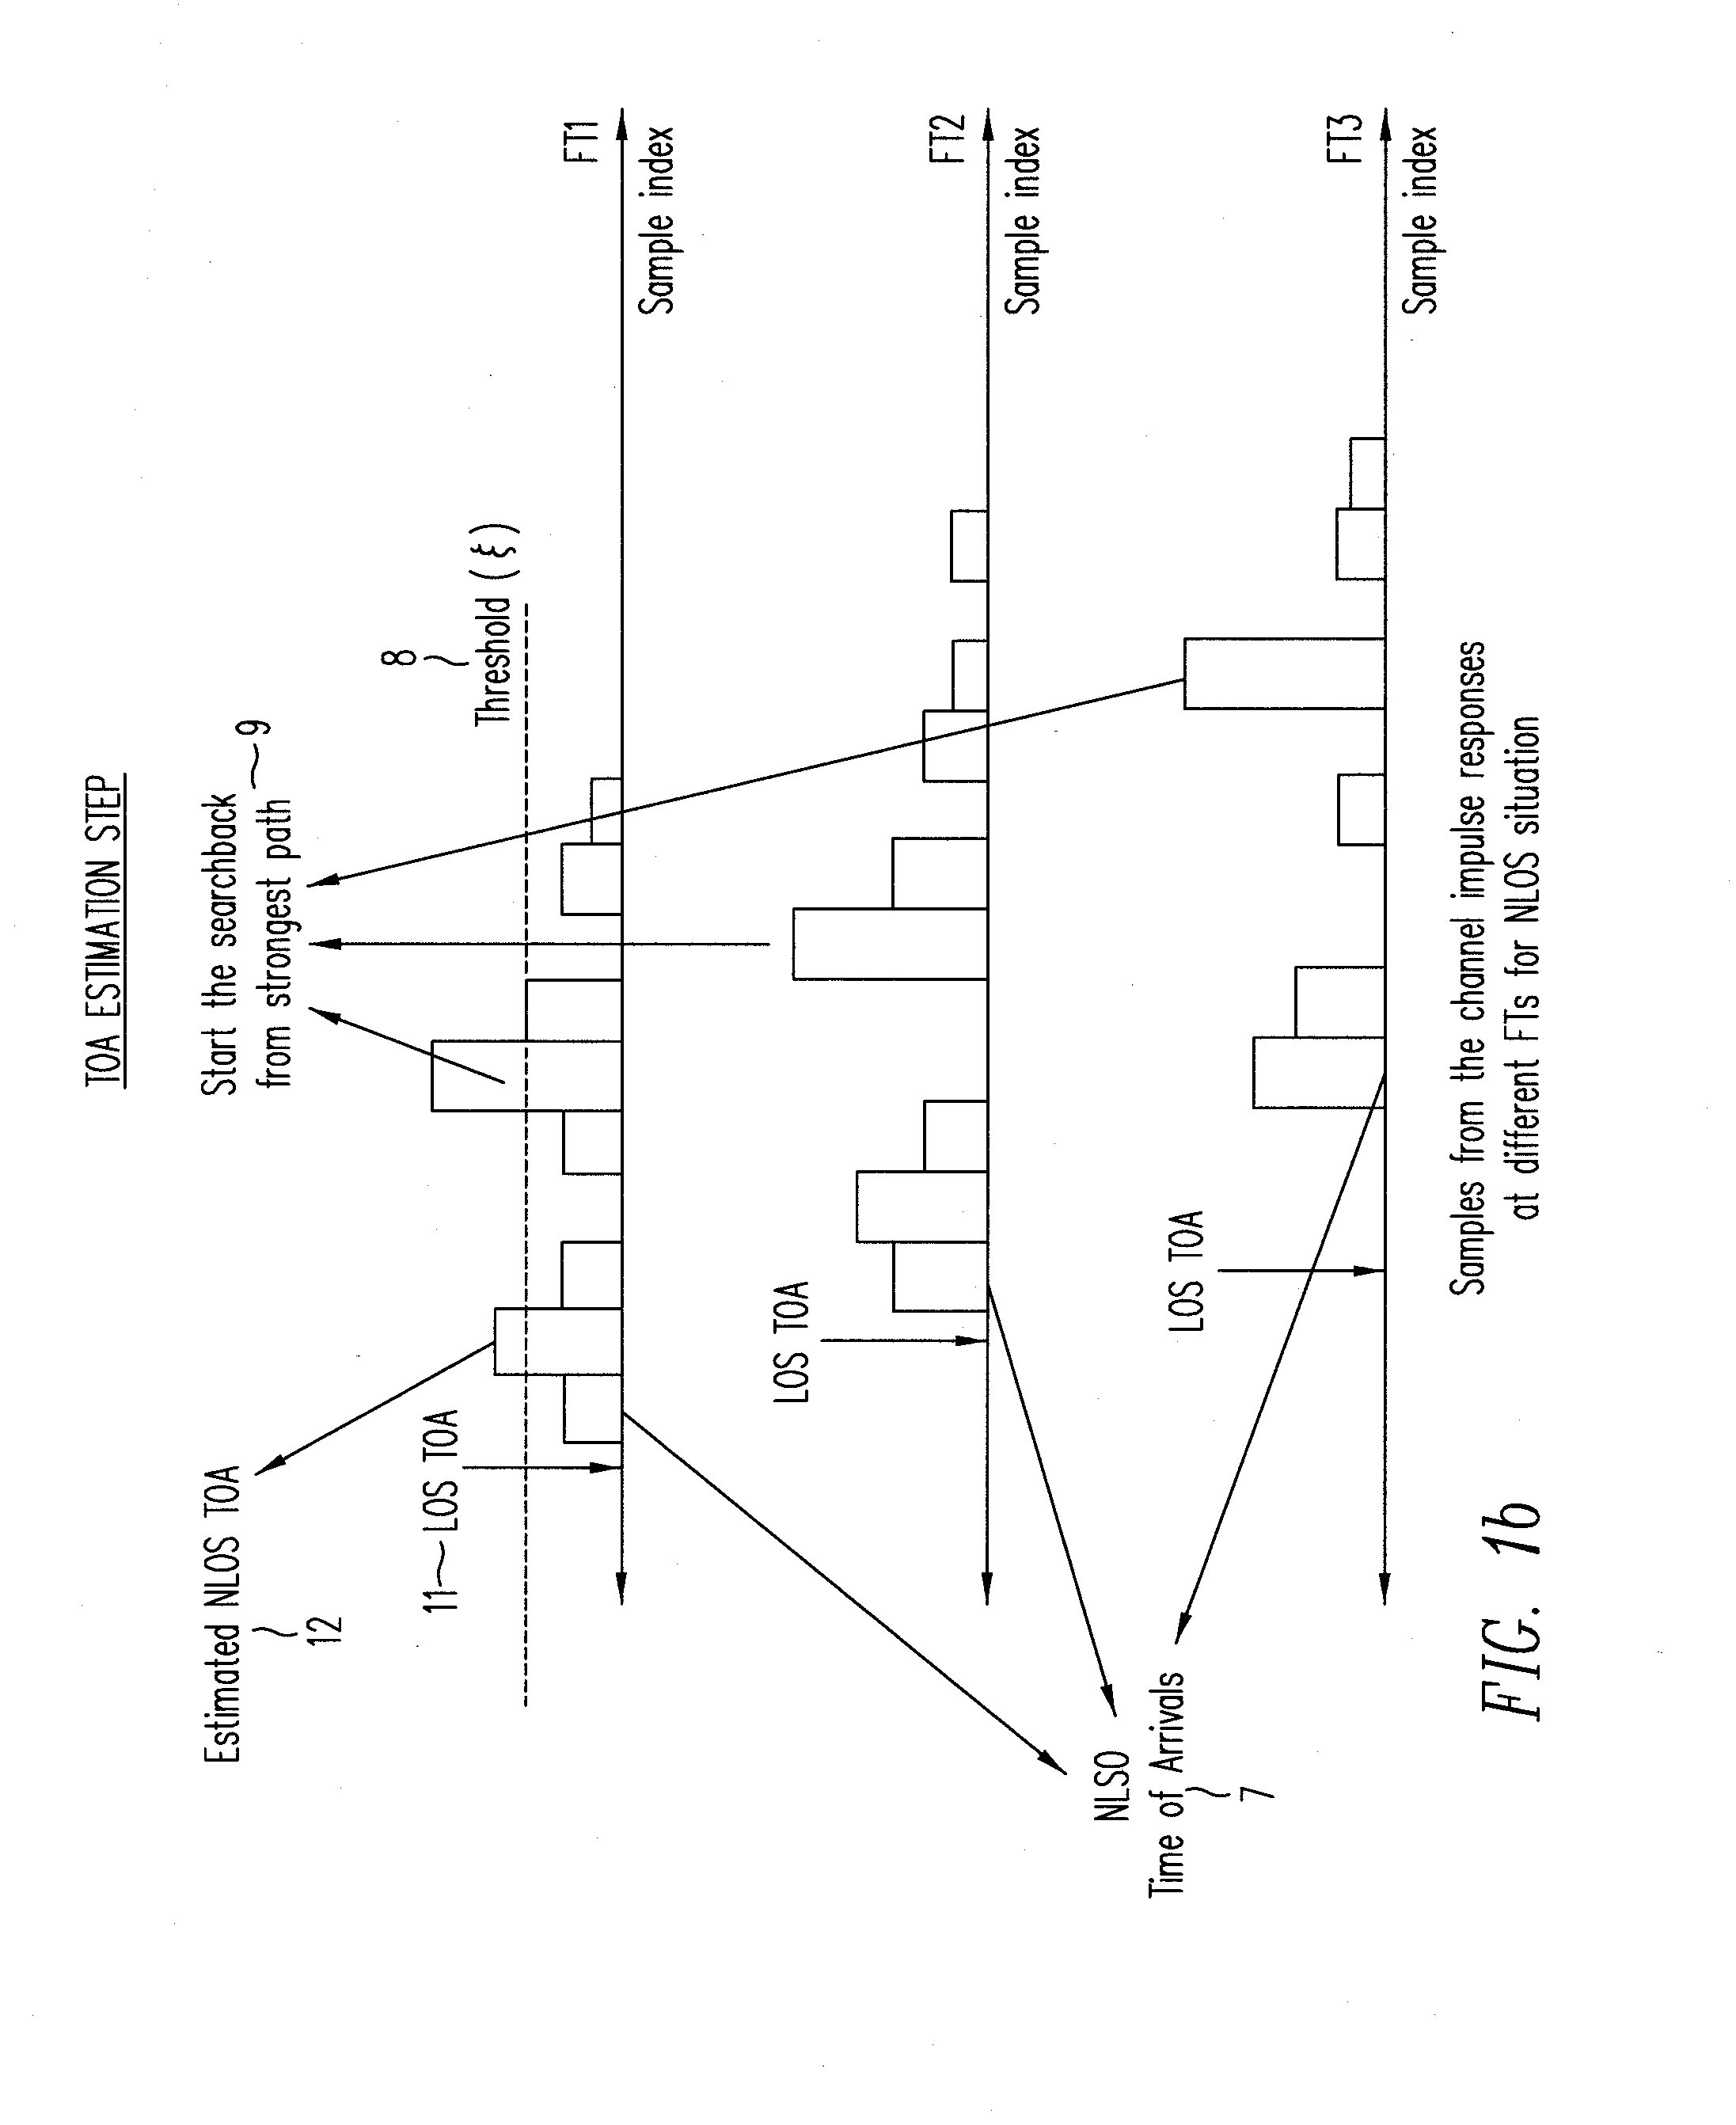 Weighted least square localization method exploiting multipath channel statisticsfor non-line-of-sight mitigation